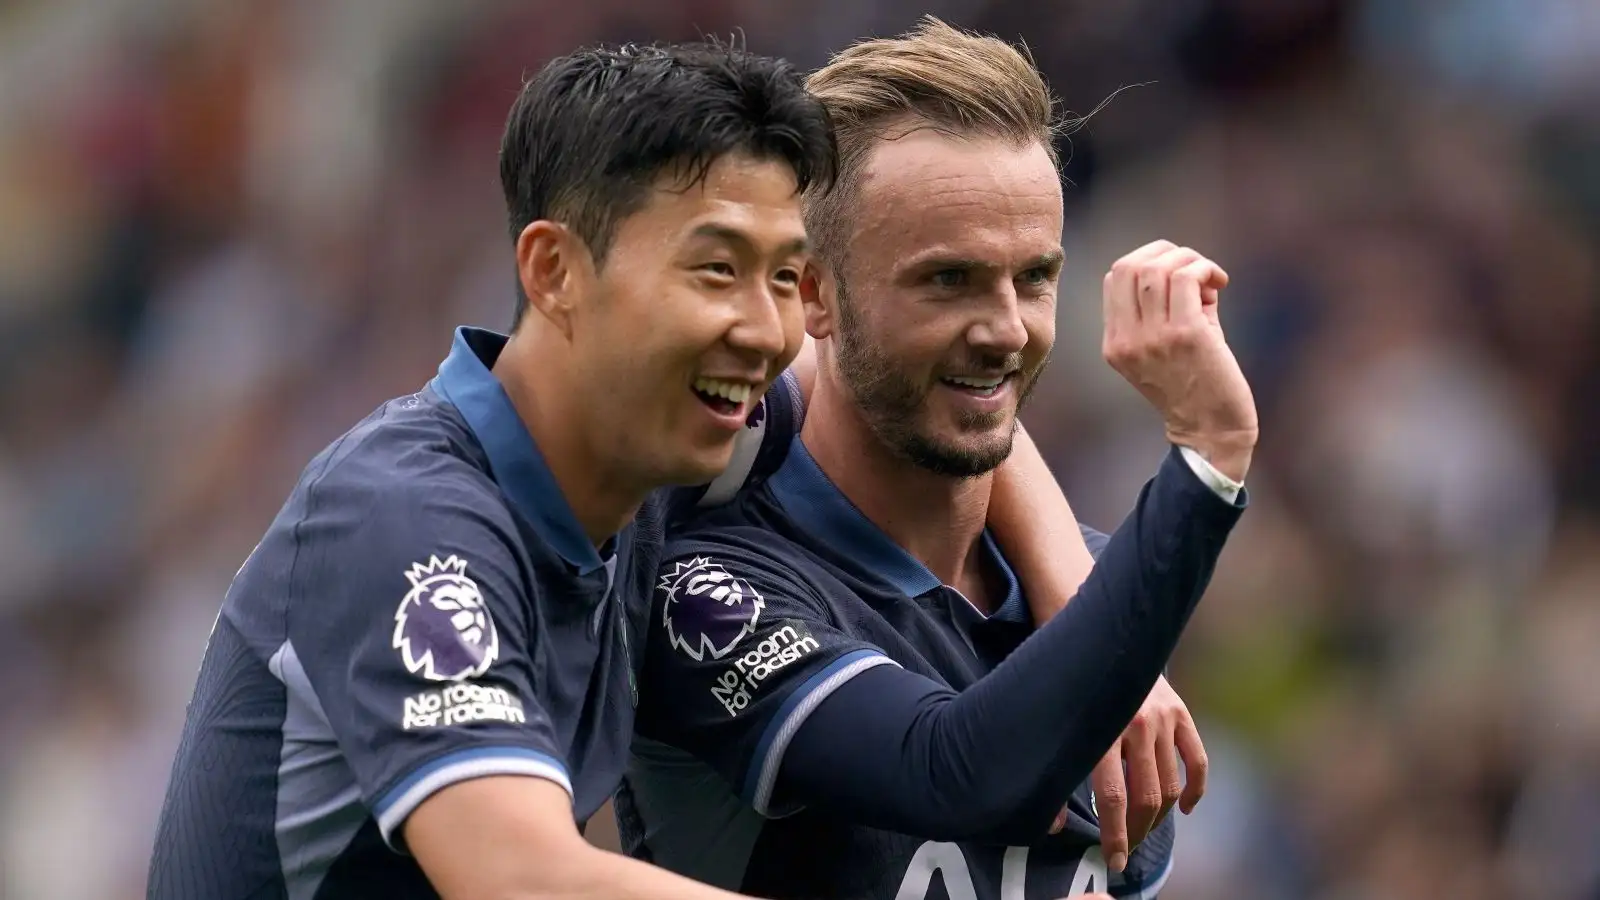 Arsenal vs Tottenham result and player ratings as Son Heung-min and James  Maddison lead Spurs fightback